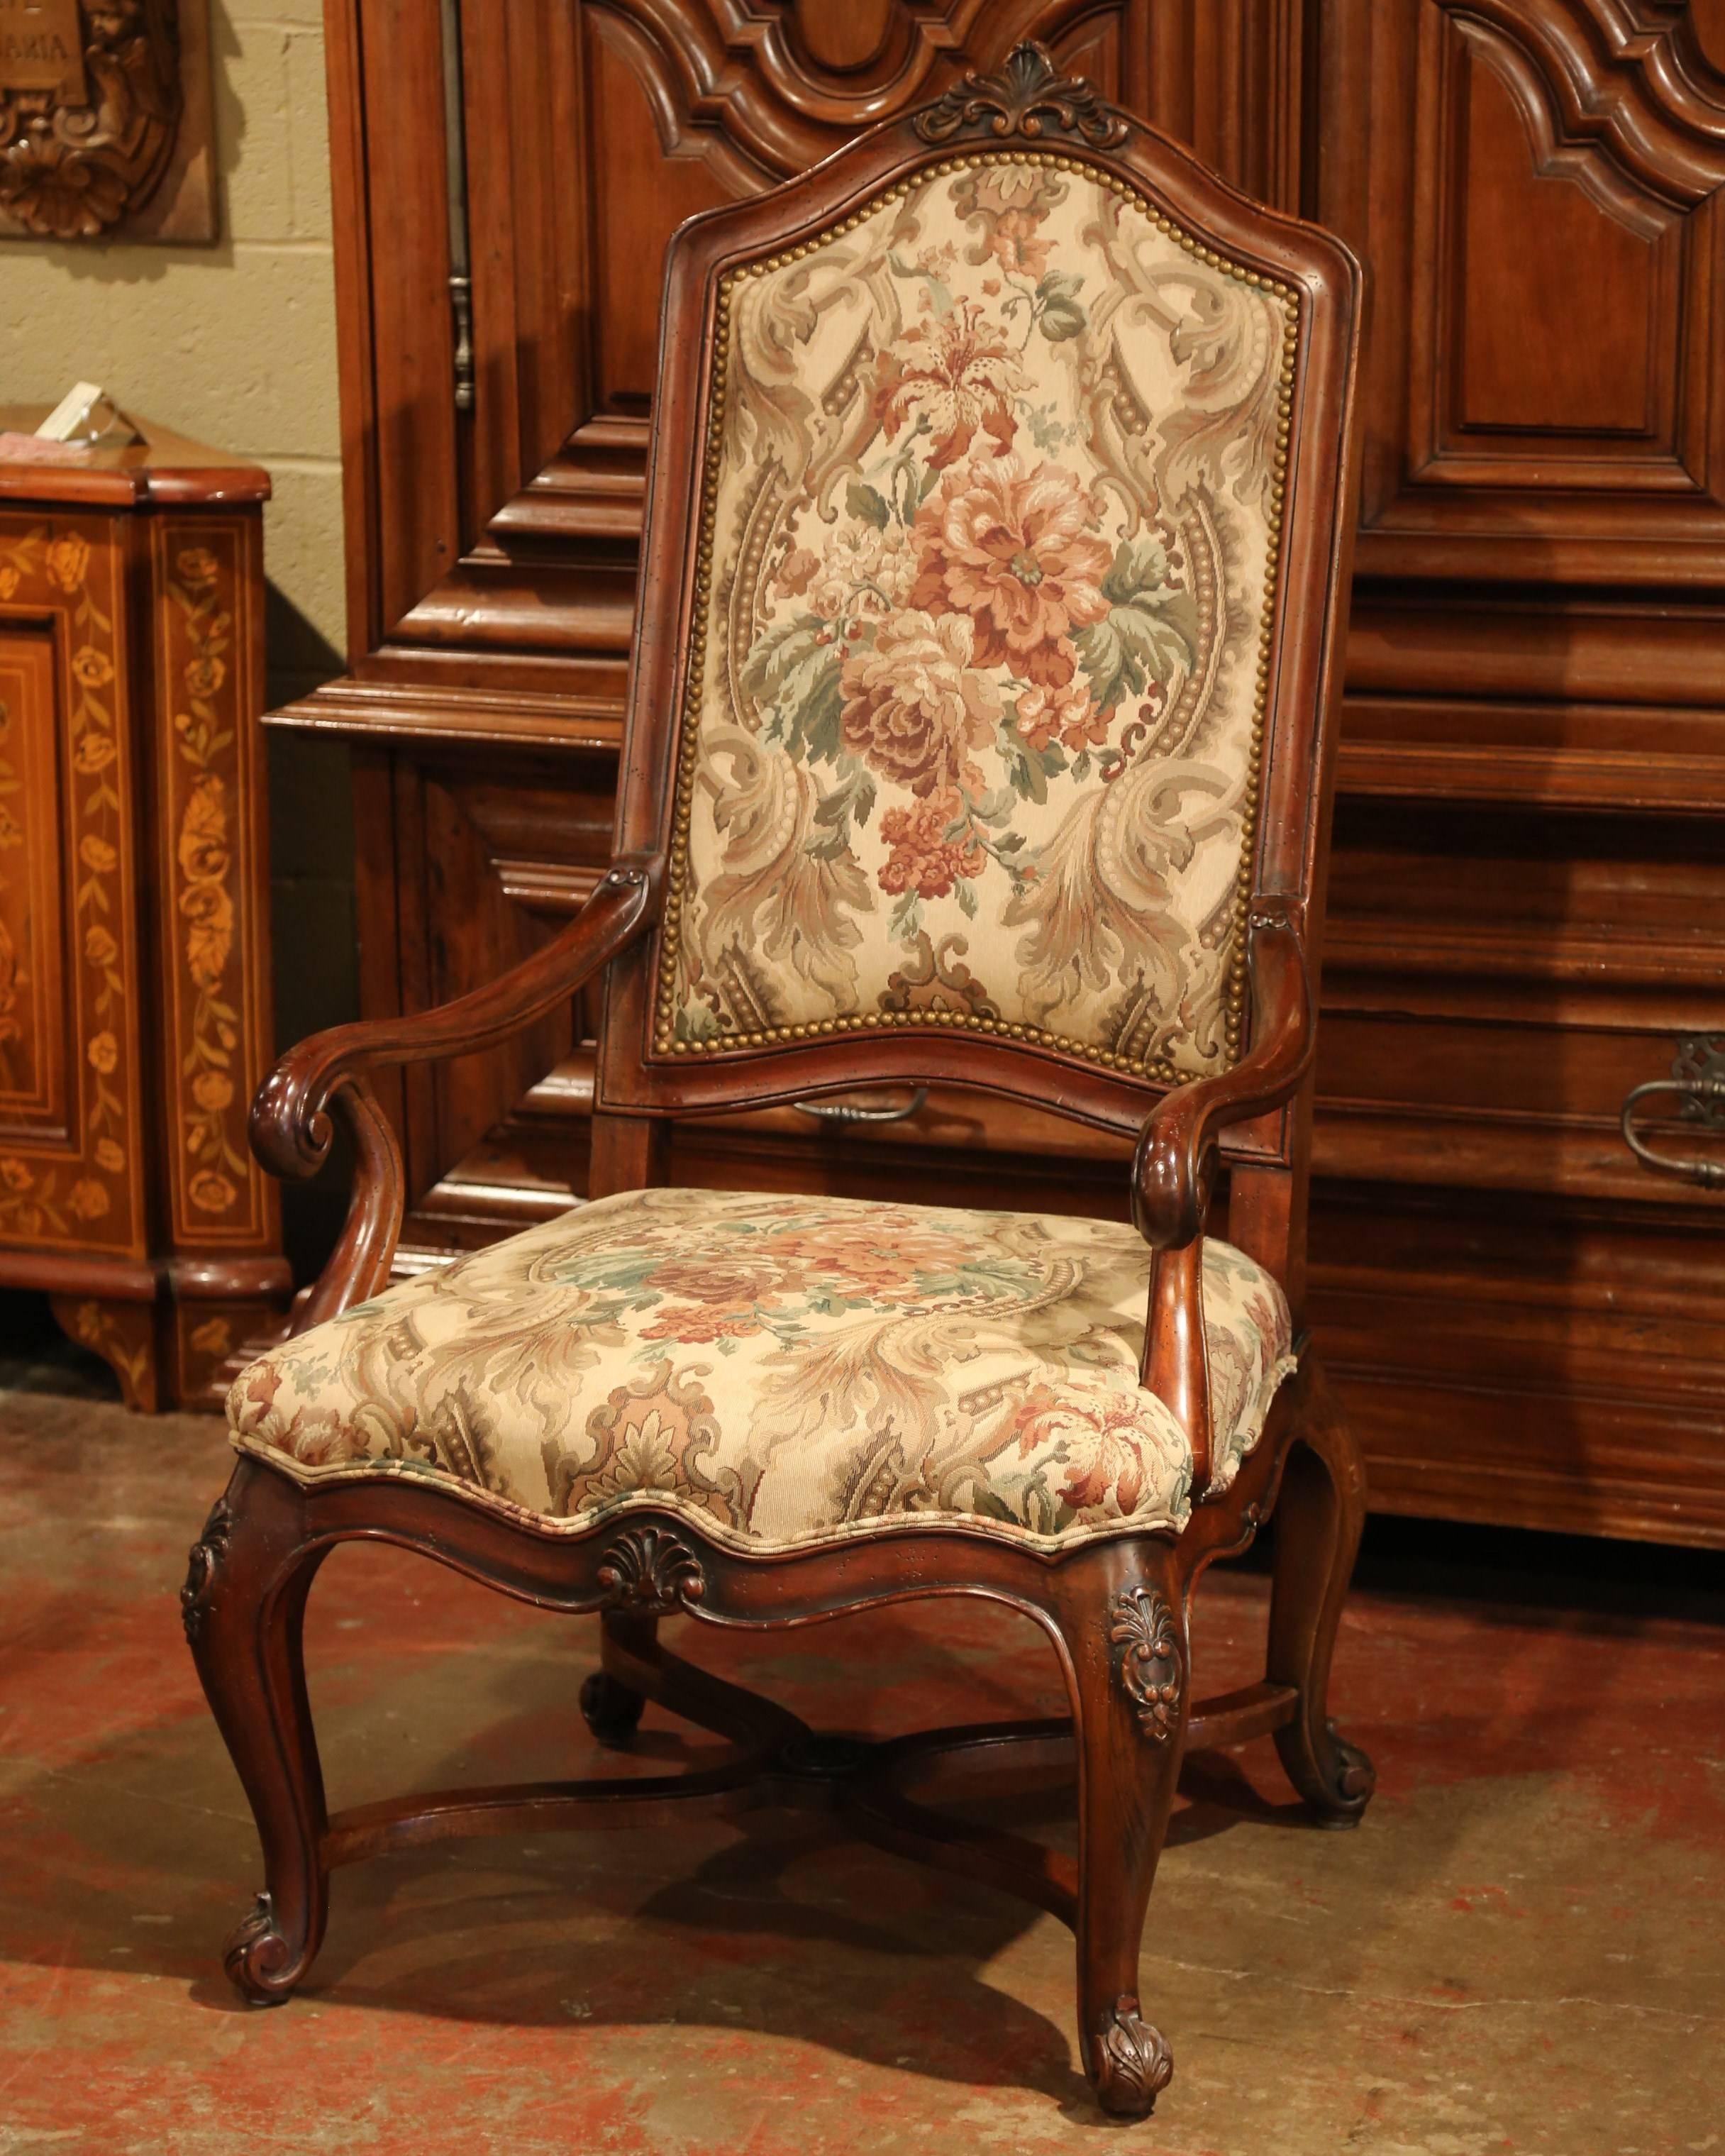 This quality dining room suite of fruitwood chairs and matching armchairs was crafted in France, circa 1980. The set includes six-side chairs and two armchairs. Each seating features elegant cabriole legs with decorative carving, a shaped apron over